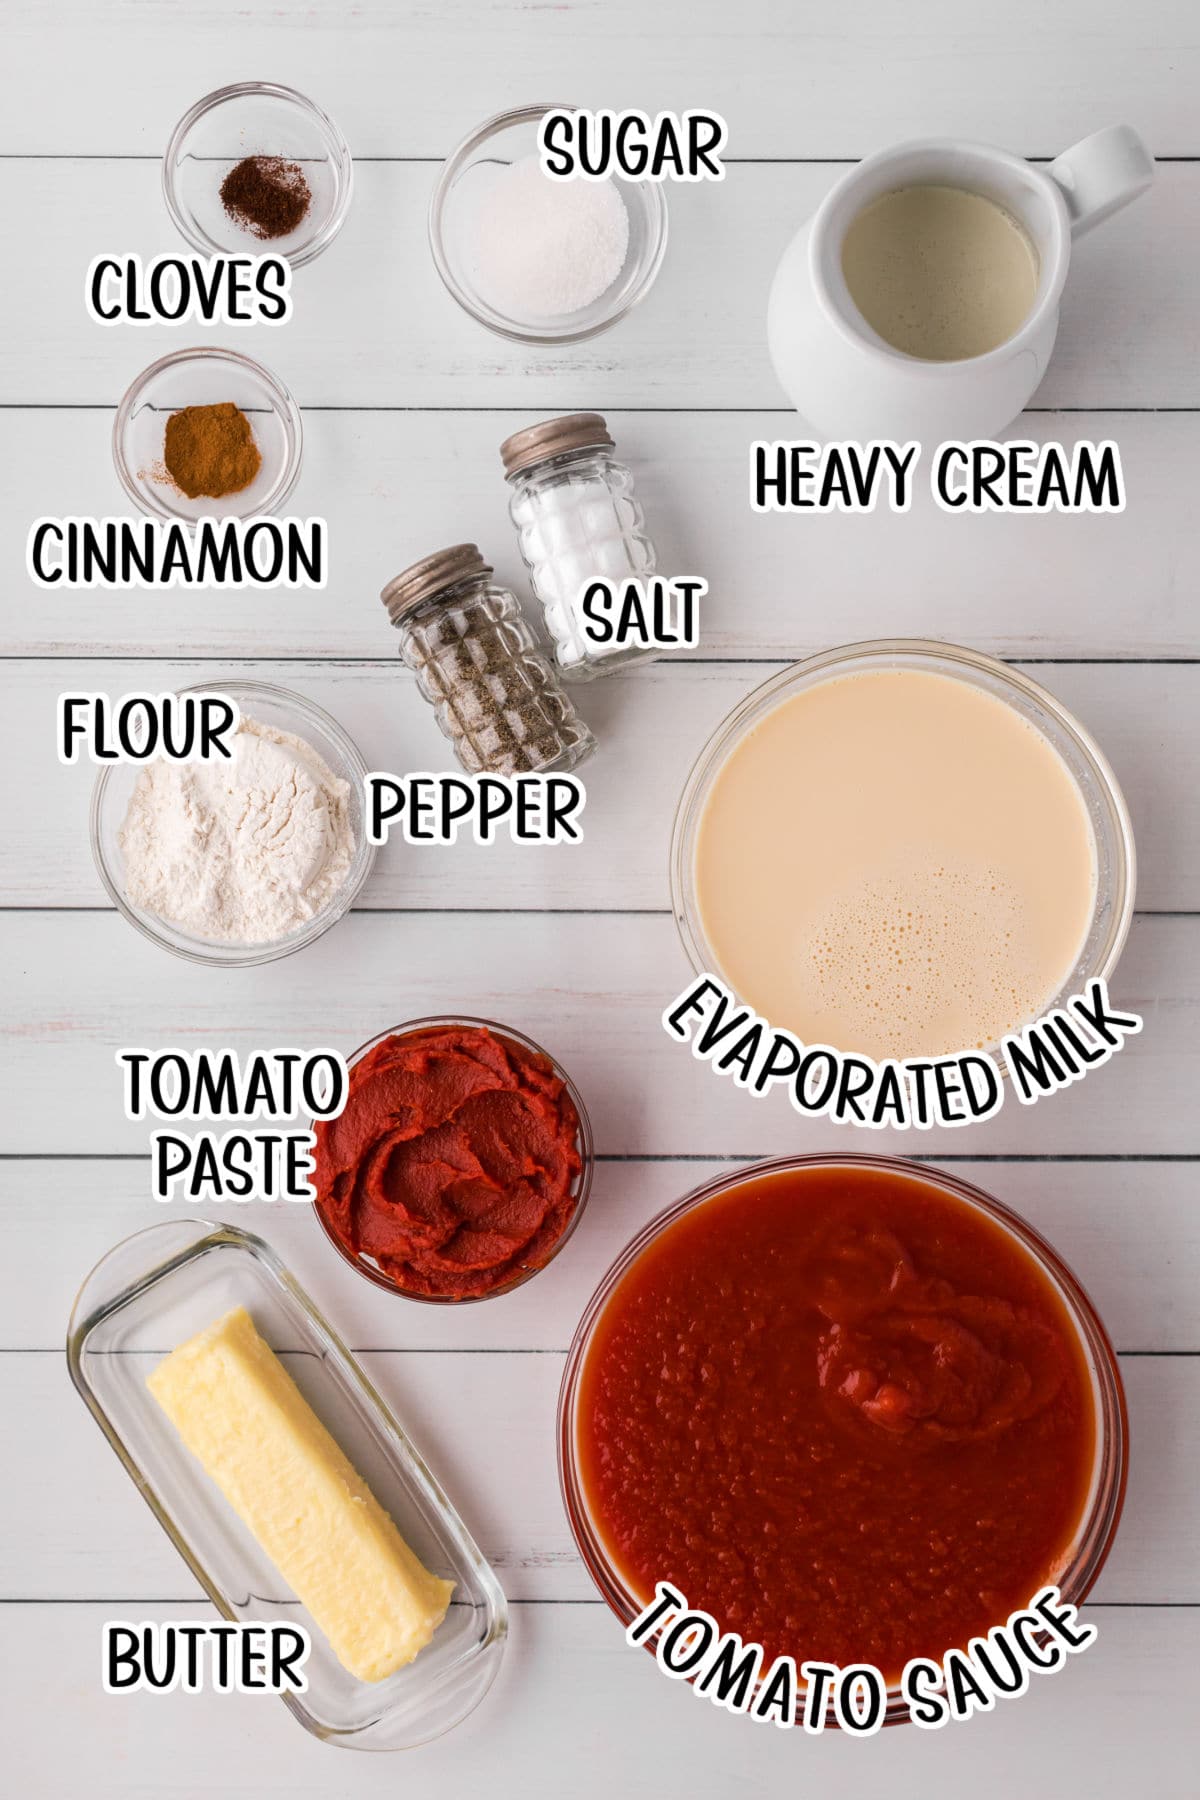 Labeled ingredients for this tomato soup recipe.